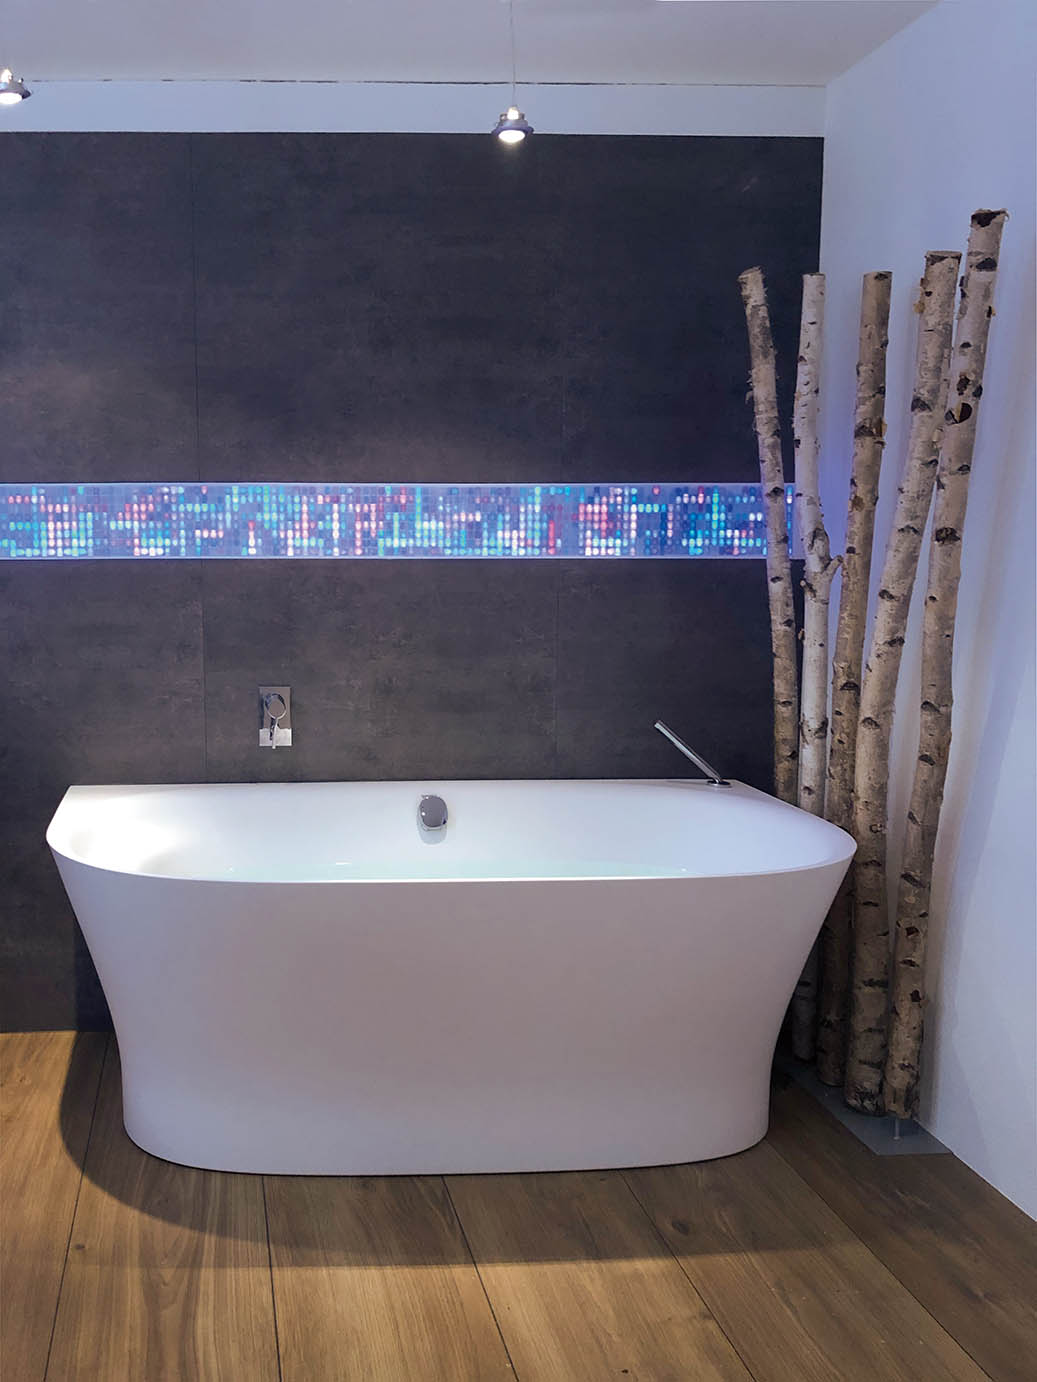 Image from Luminous Concepts photo gallery showing colorful volatiles installed in a bathroom environment with standalone bath tub and decorative wood pieces